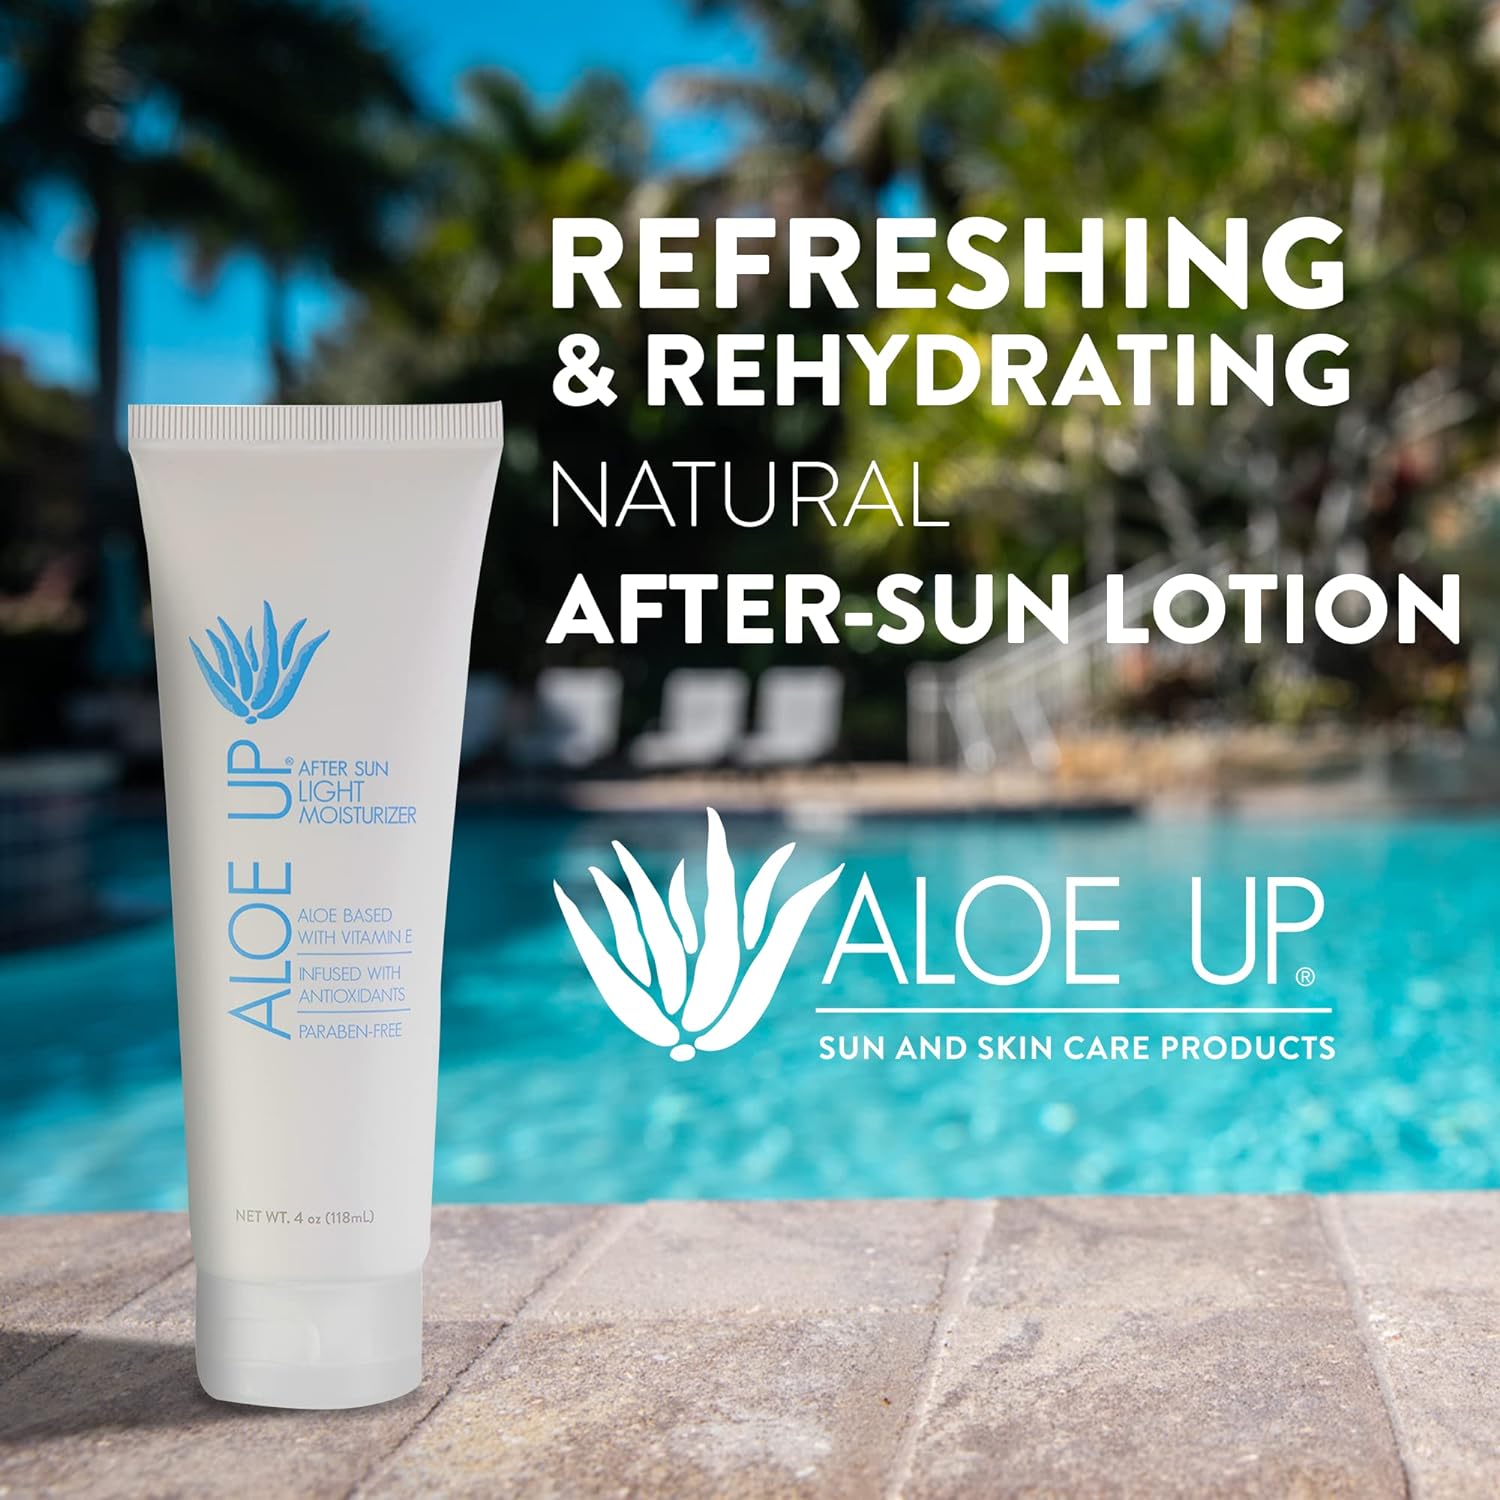 ALOE UP Spa Collection After Sun Light Moisturizer - Organic Hydrating After Sun Lotion With Aloe Vera Gel and Vitamin E - Reef Friendly - Mineral Oil Free - Peach-Apricot Fragrance - 4 Oz : Beauty & Personal Care